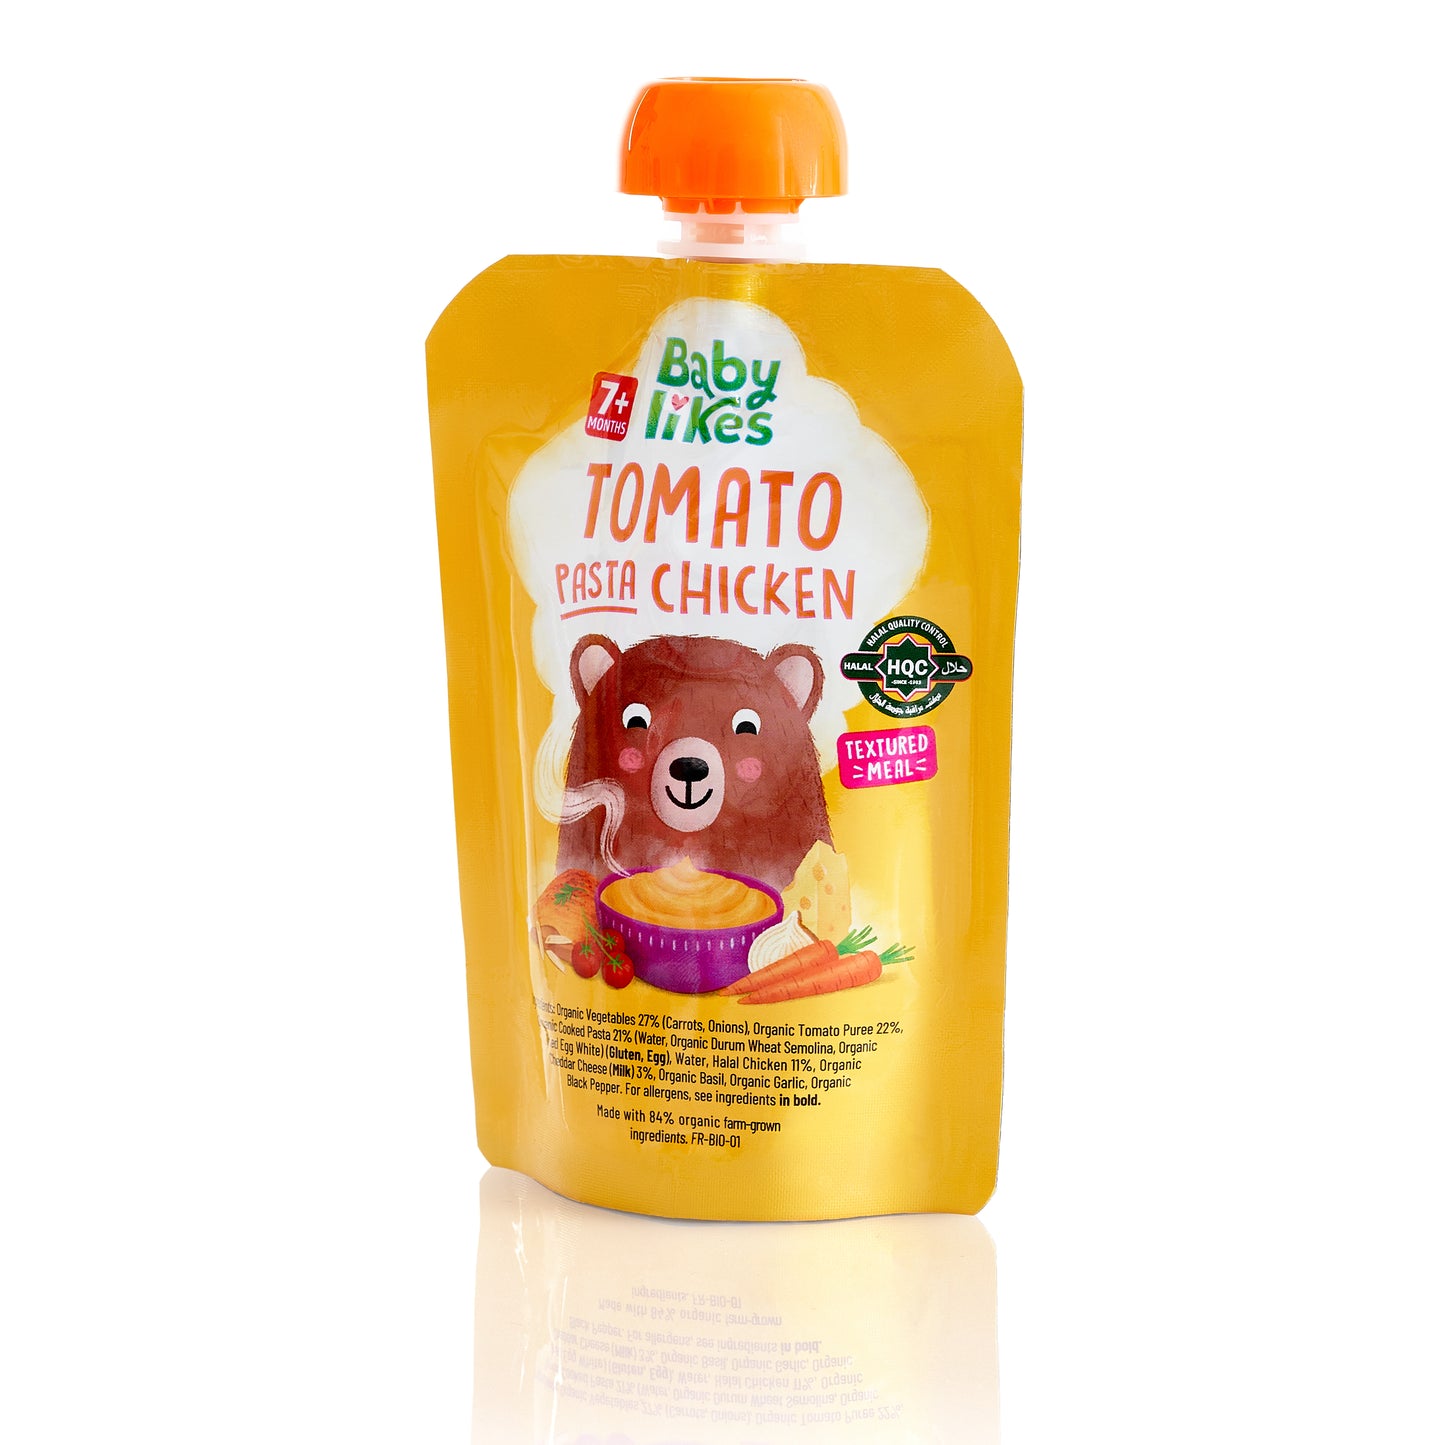 Tomato Pasta Chicken 6 pouches x 130 grams - Baby Puree for 7+ months